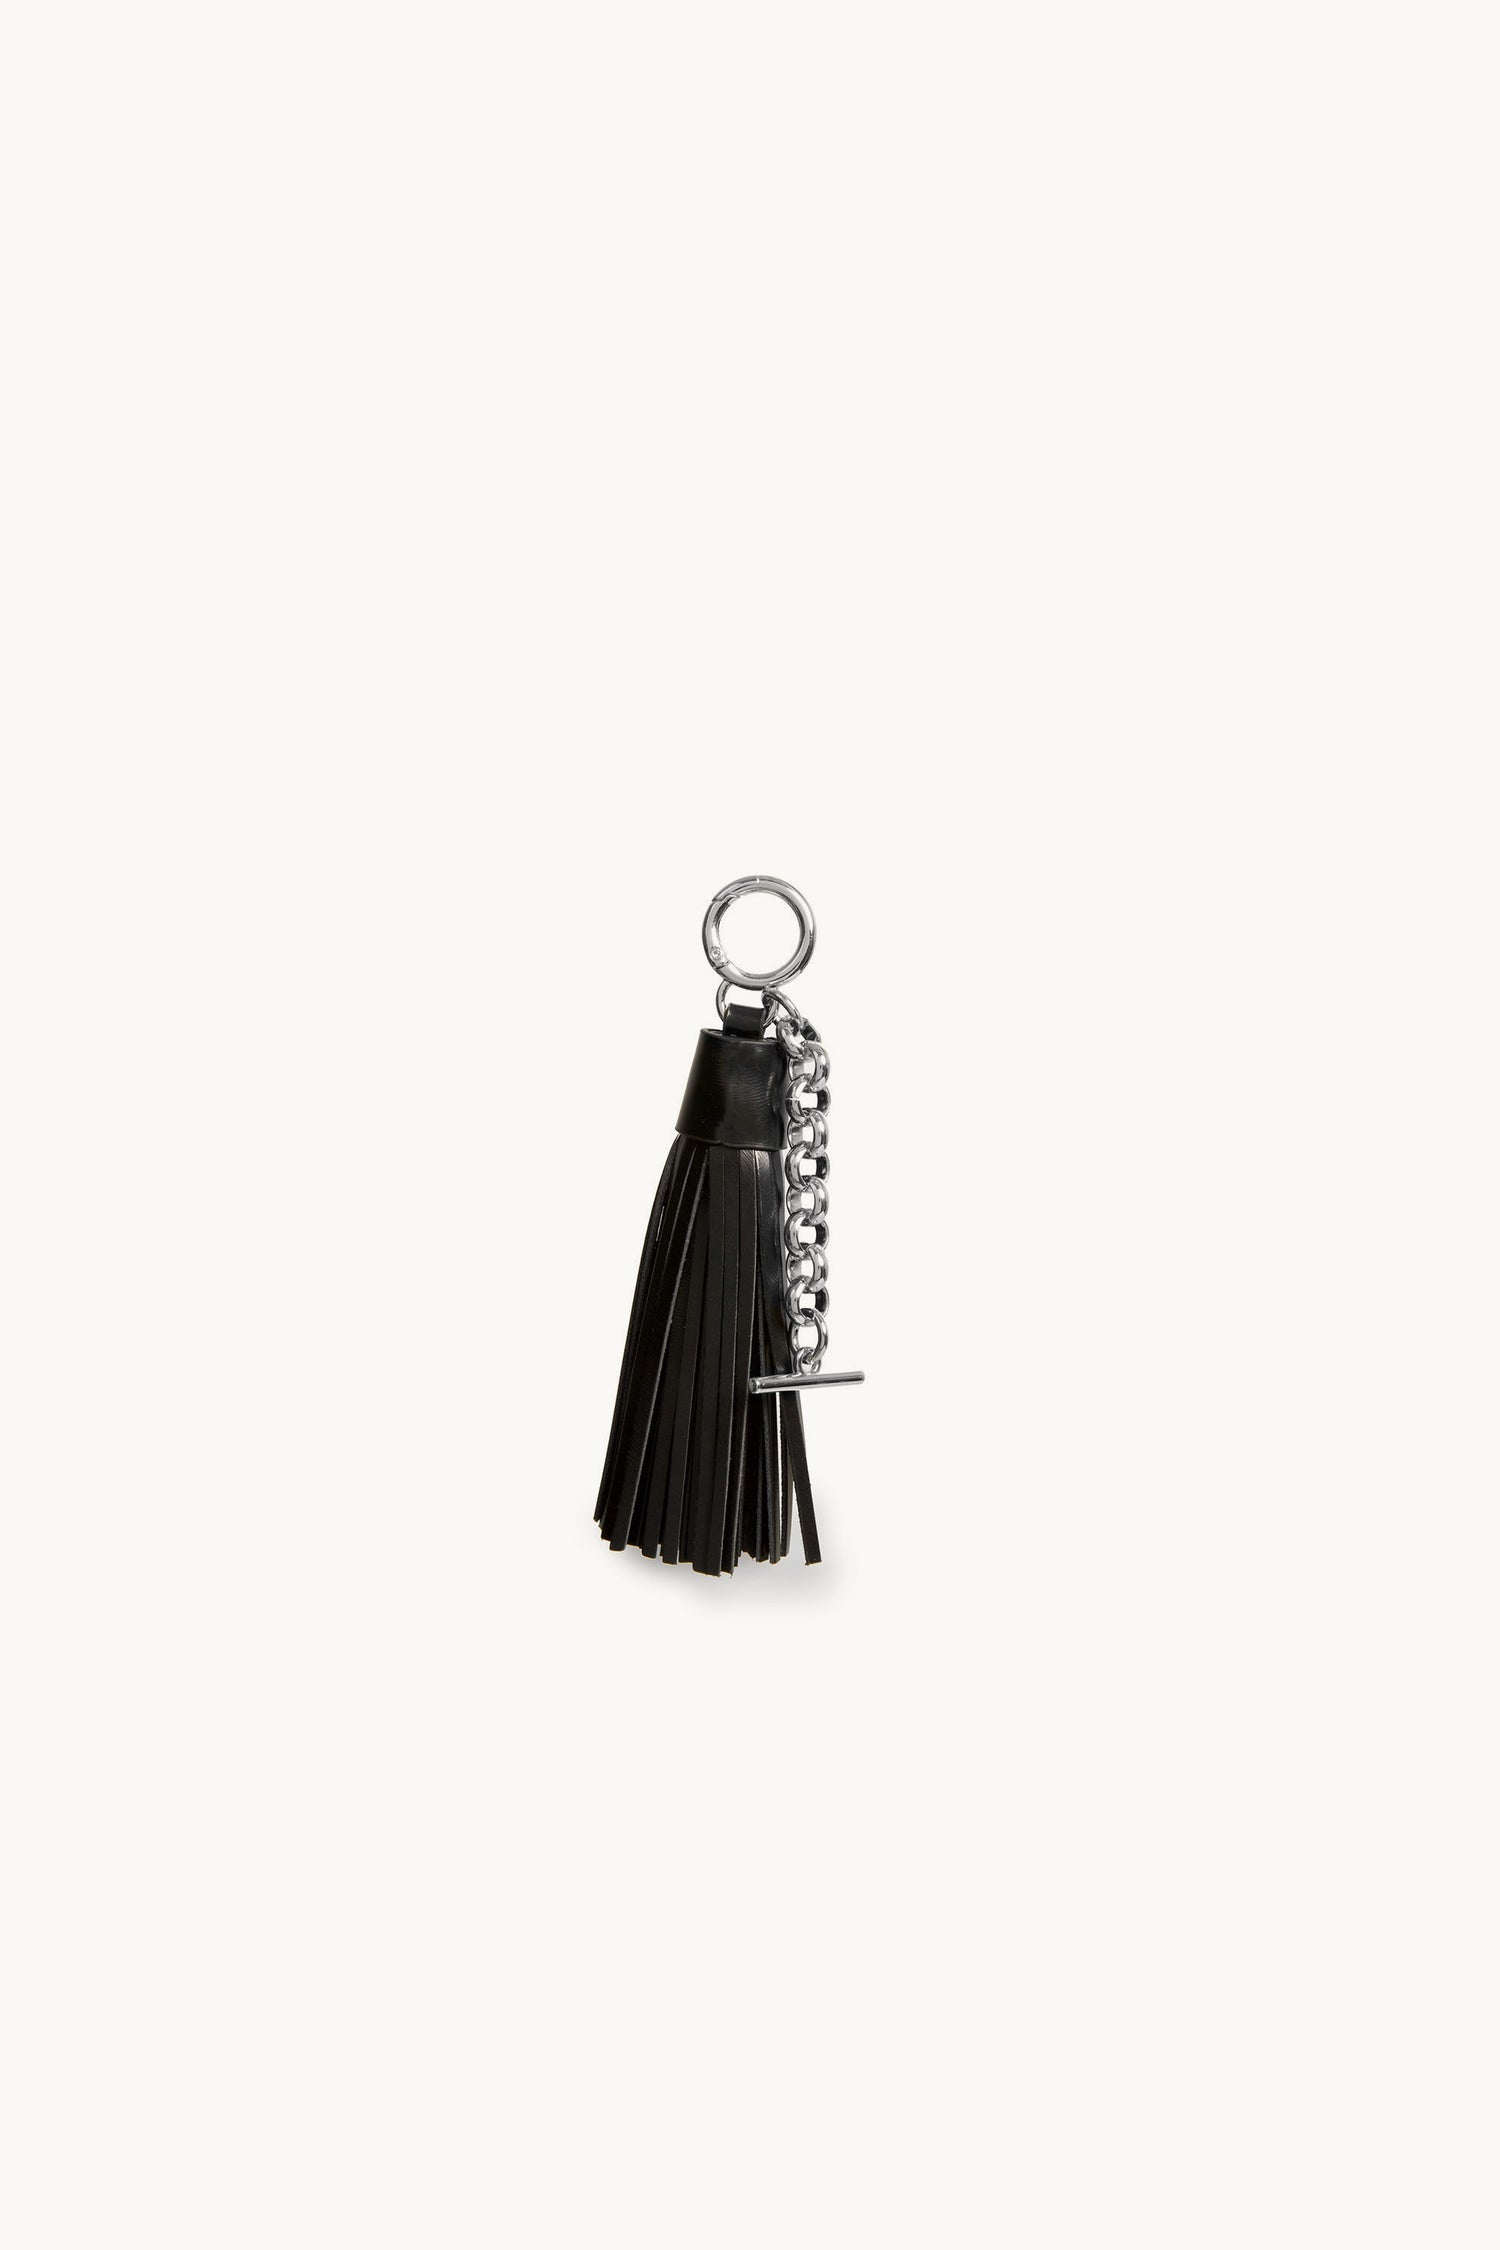 The Harlow Lux Keychain - Silver